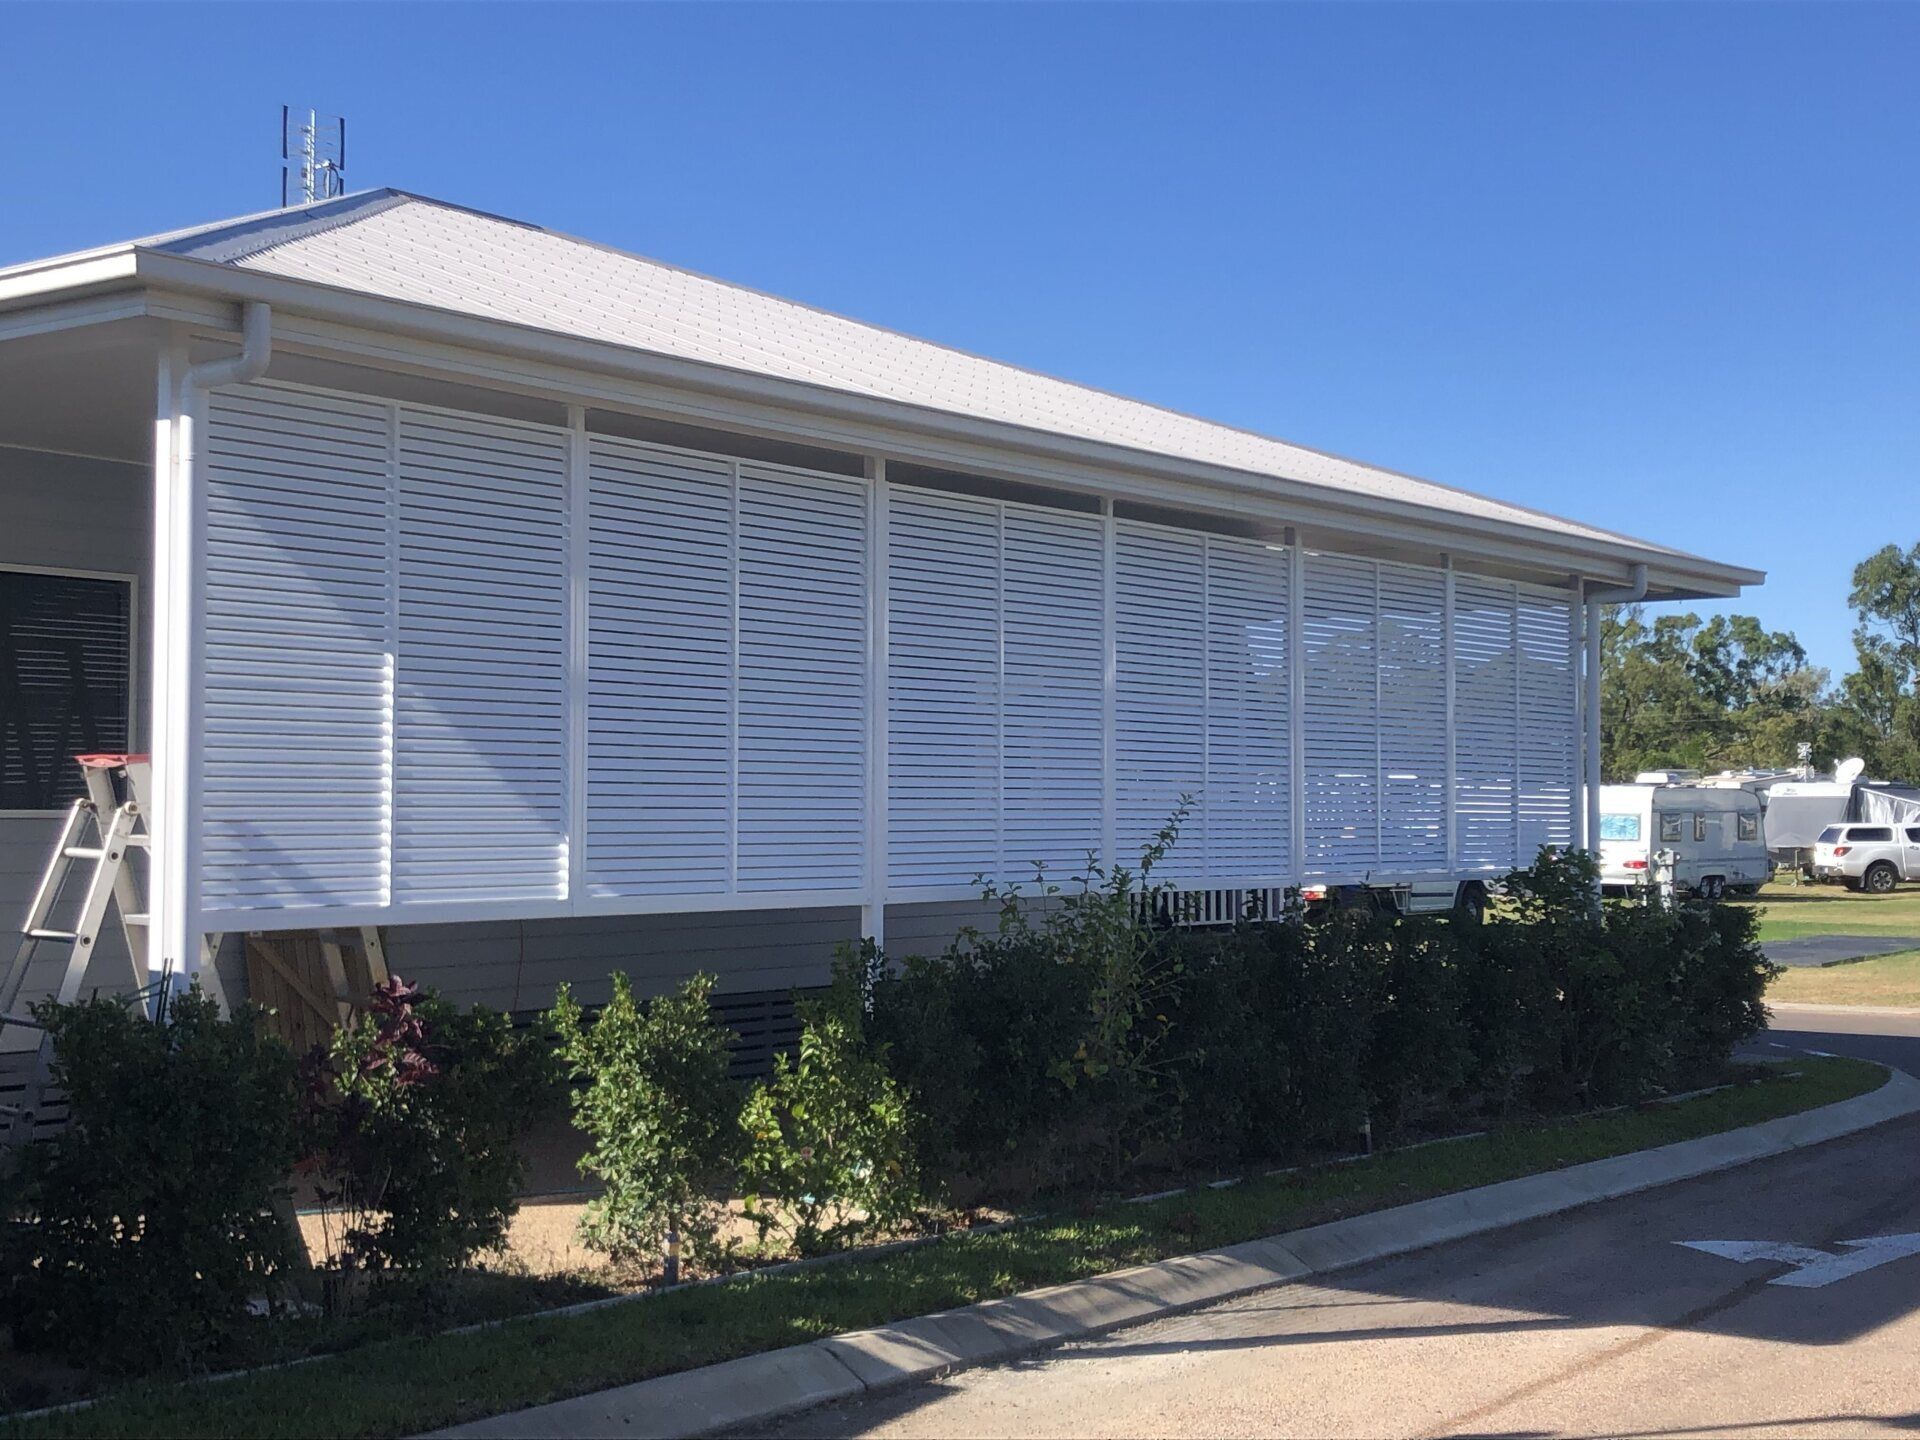 House With Privacy Screen — Lifestyle Aluminium Lattice In Townsville Qld